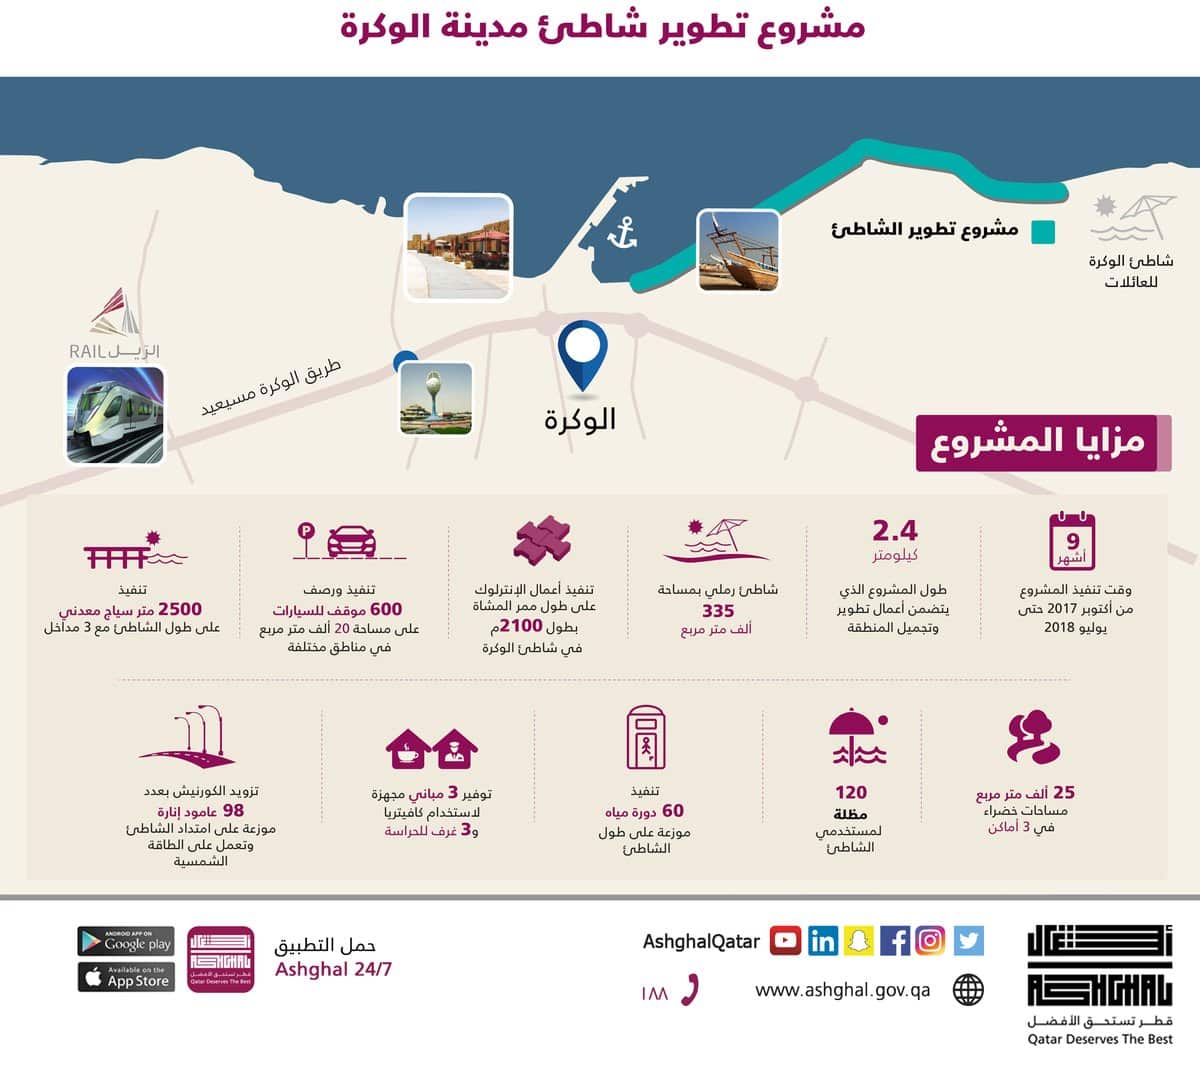 Al Wakrah Beach Development Project Opening to public on 15 May 2018